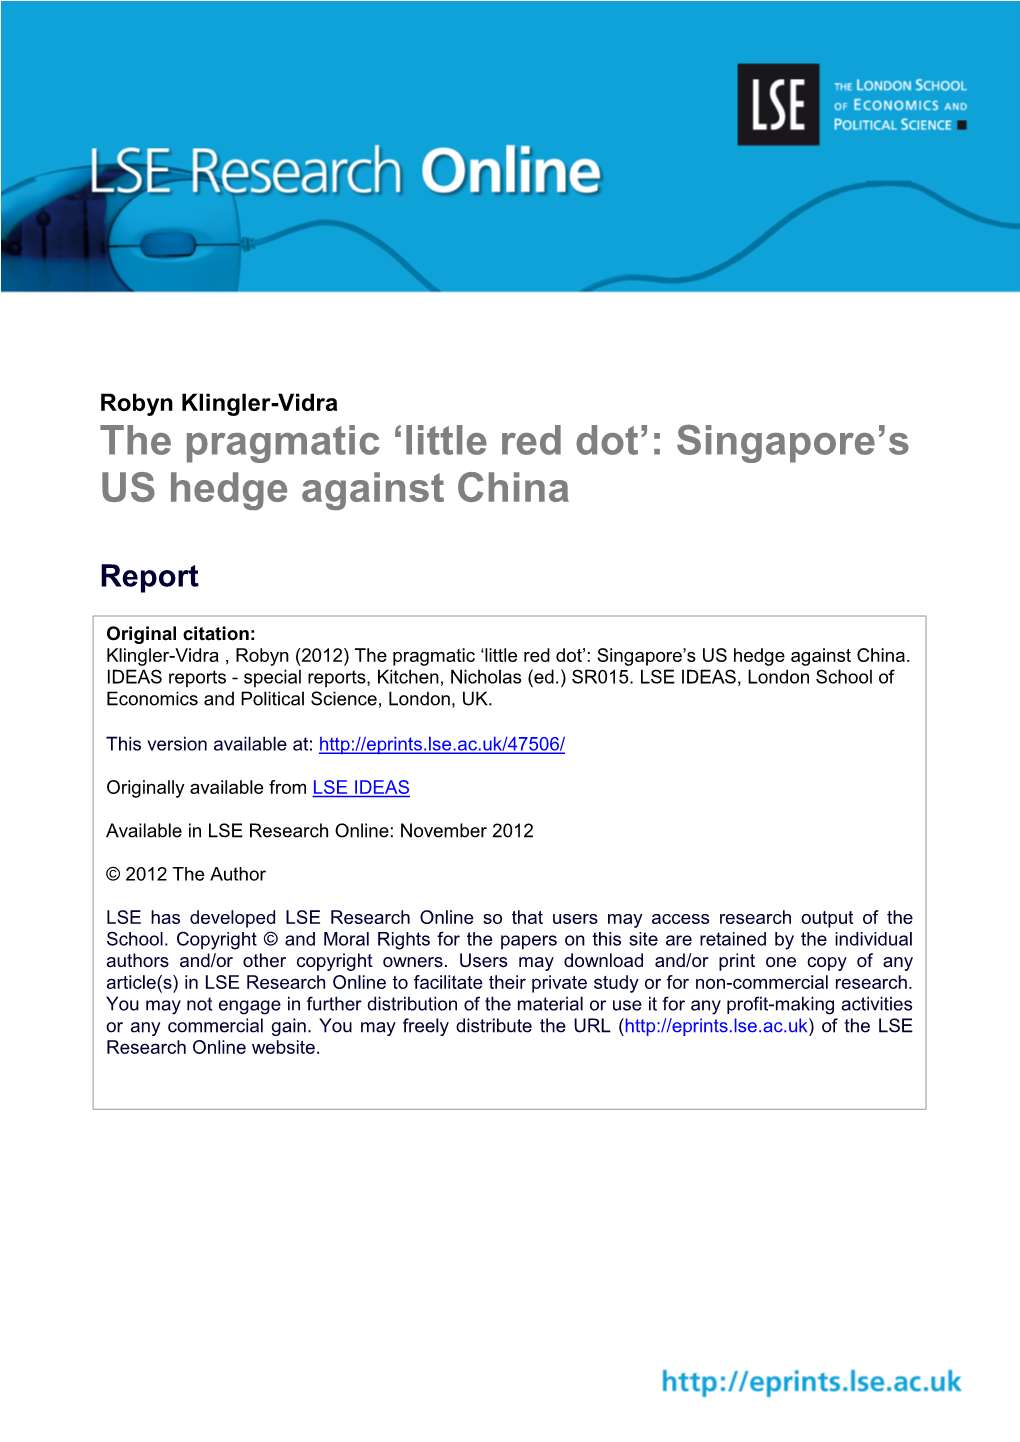 The Pragmatic 'Little Red Dot': Singapore's US Hedge Against China